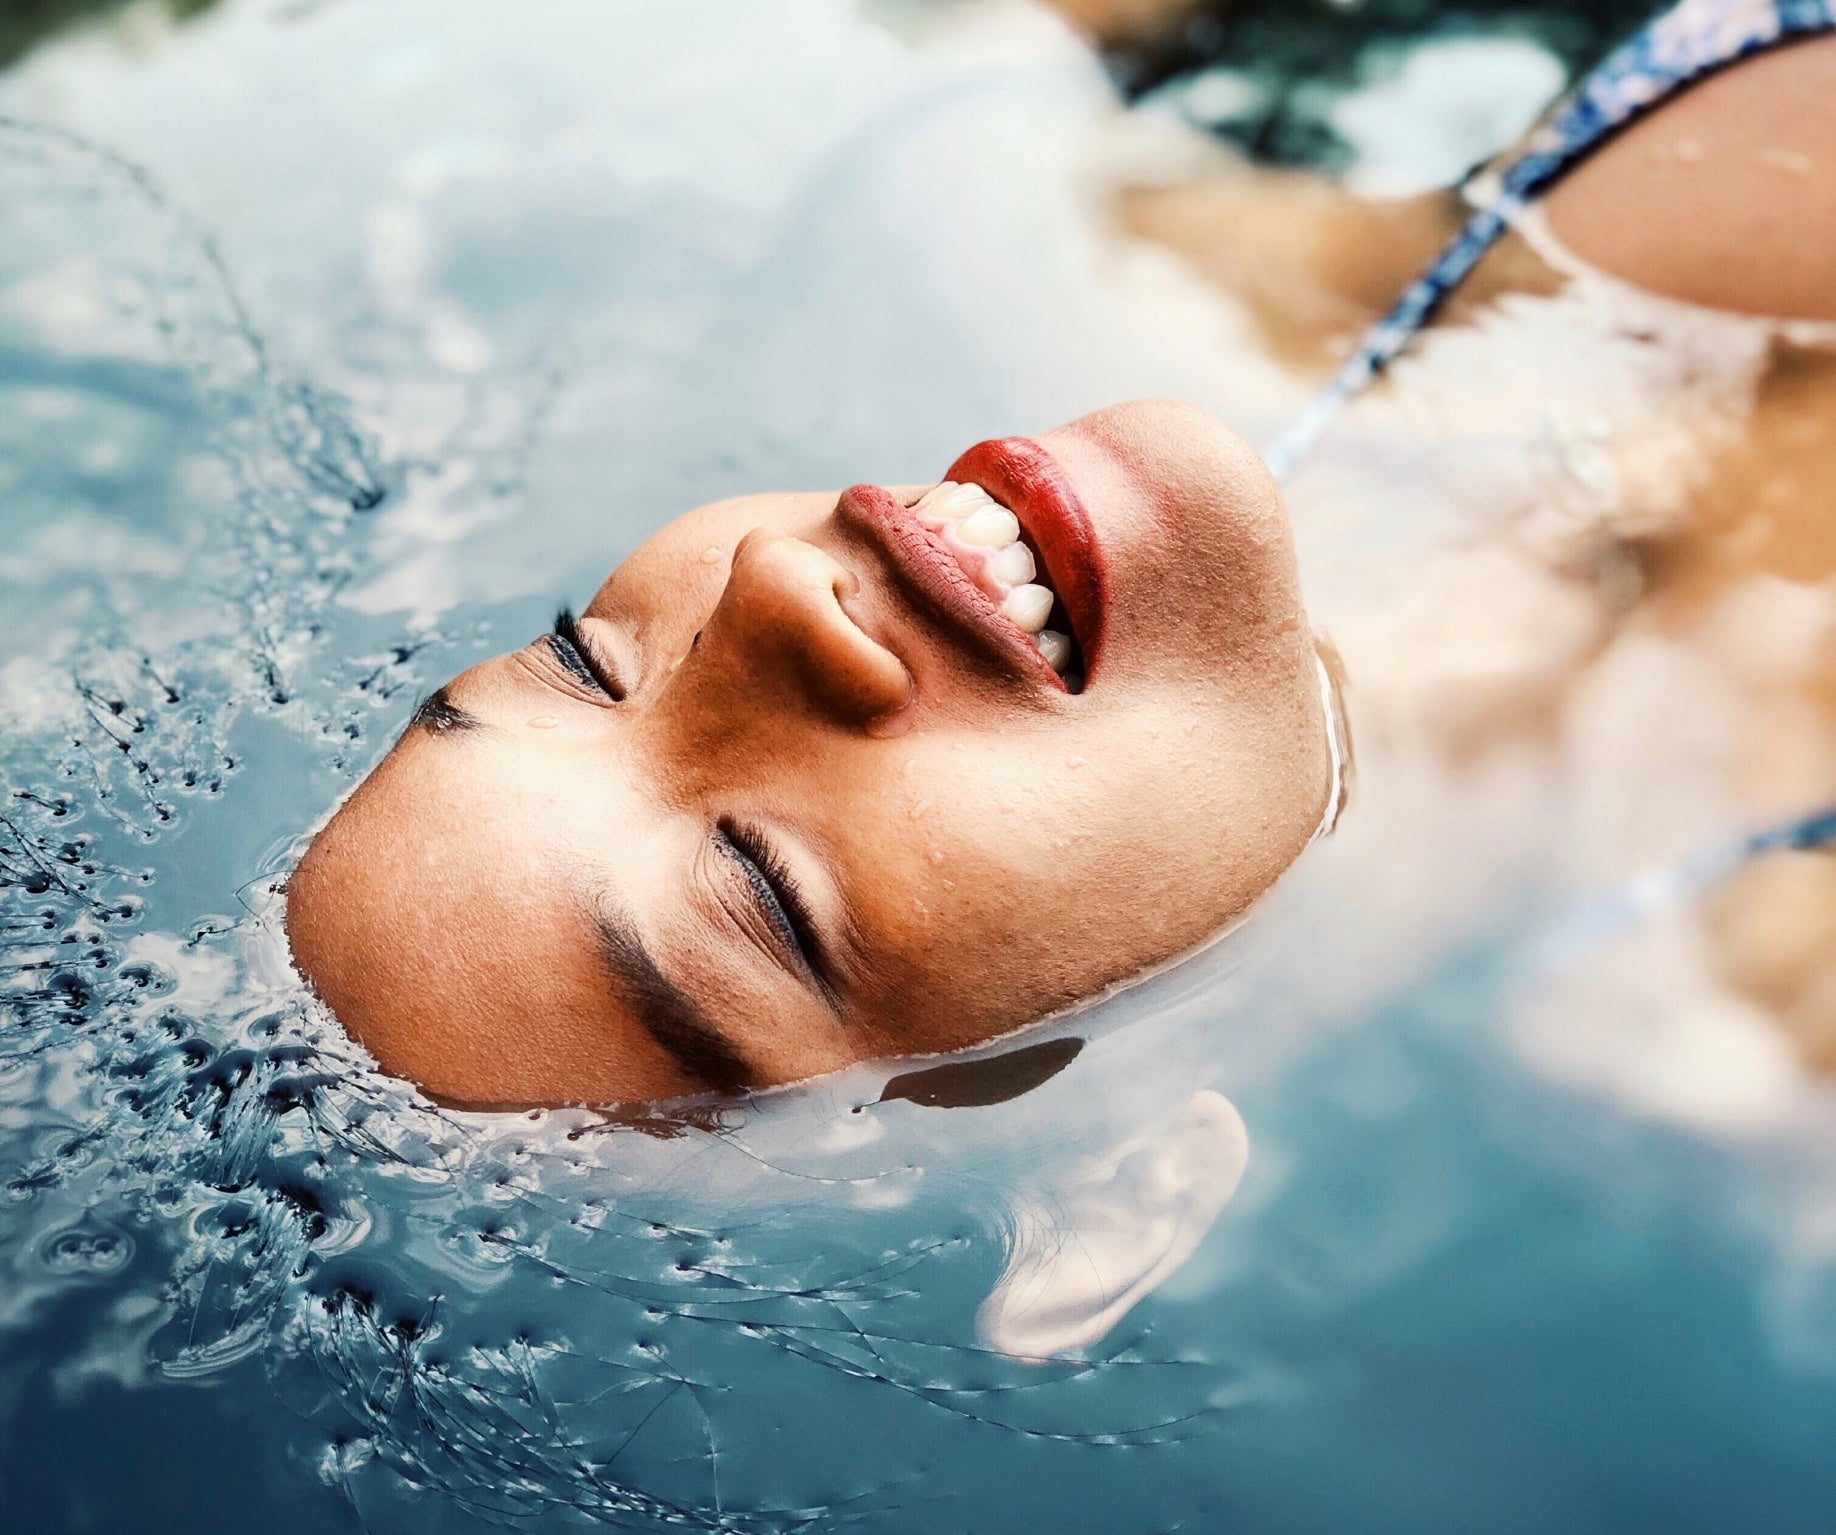 Is Your Skin Dry, Dehydrated, or Both?